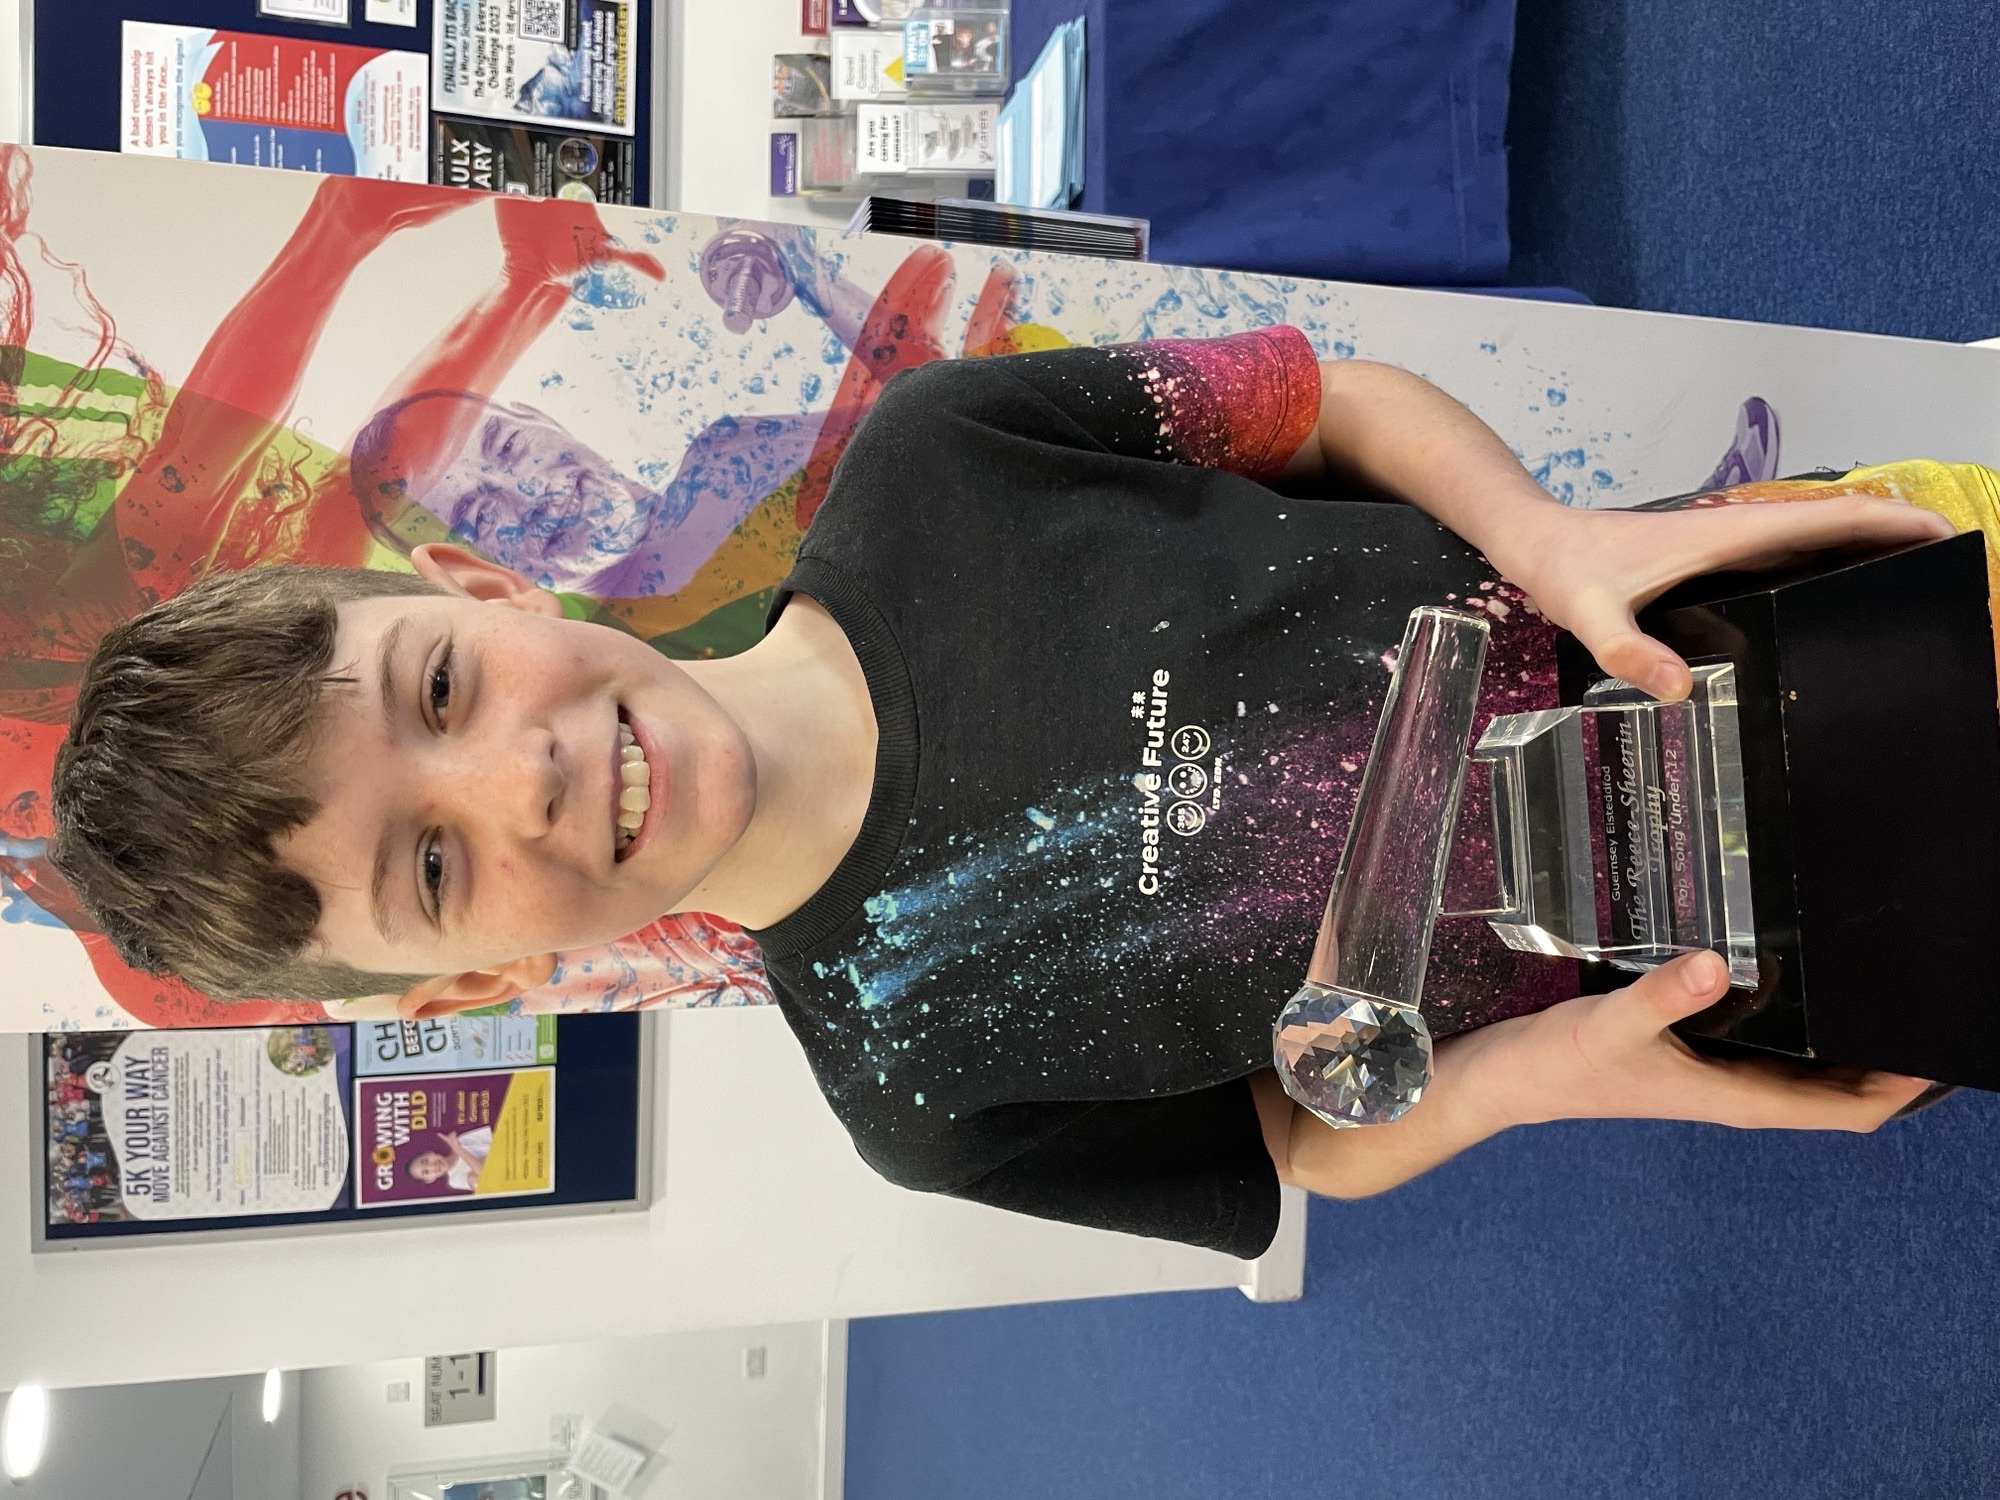 Congratulations to Jacob Morgan who won the Pop Song Solo section of the Eisteddfod today!